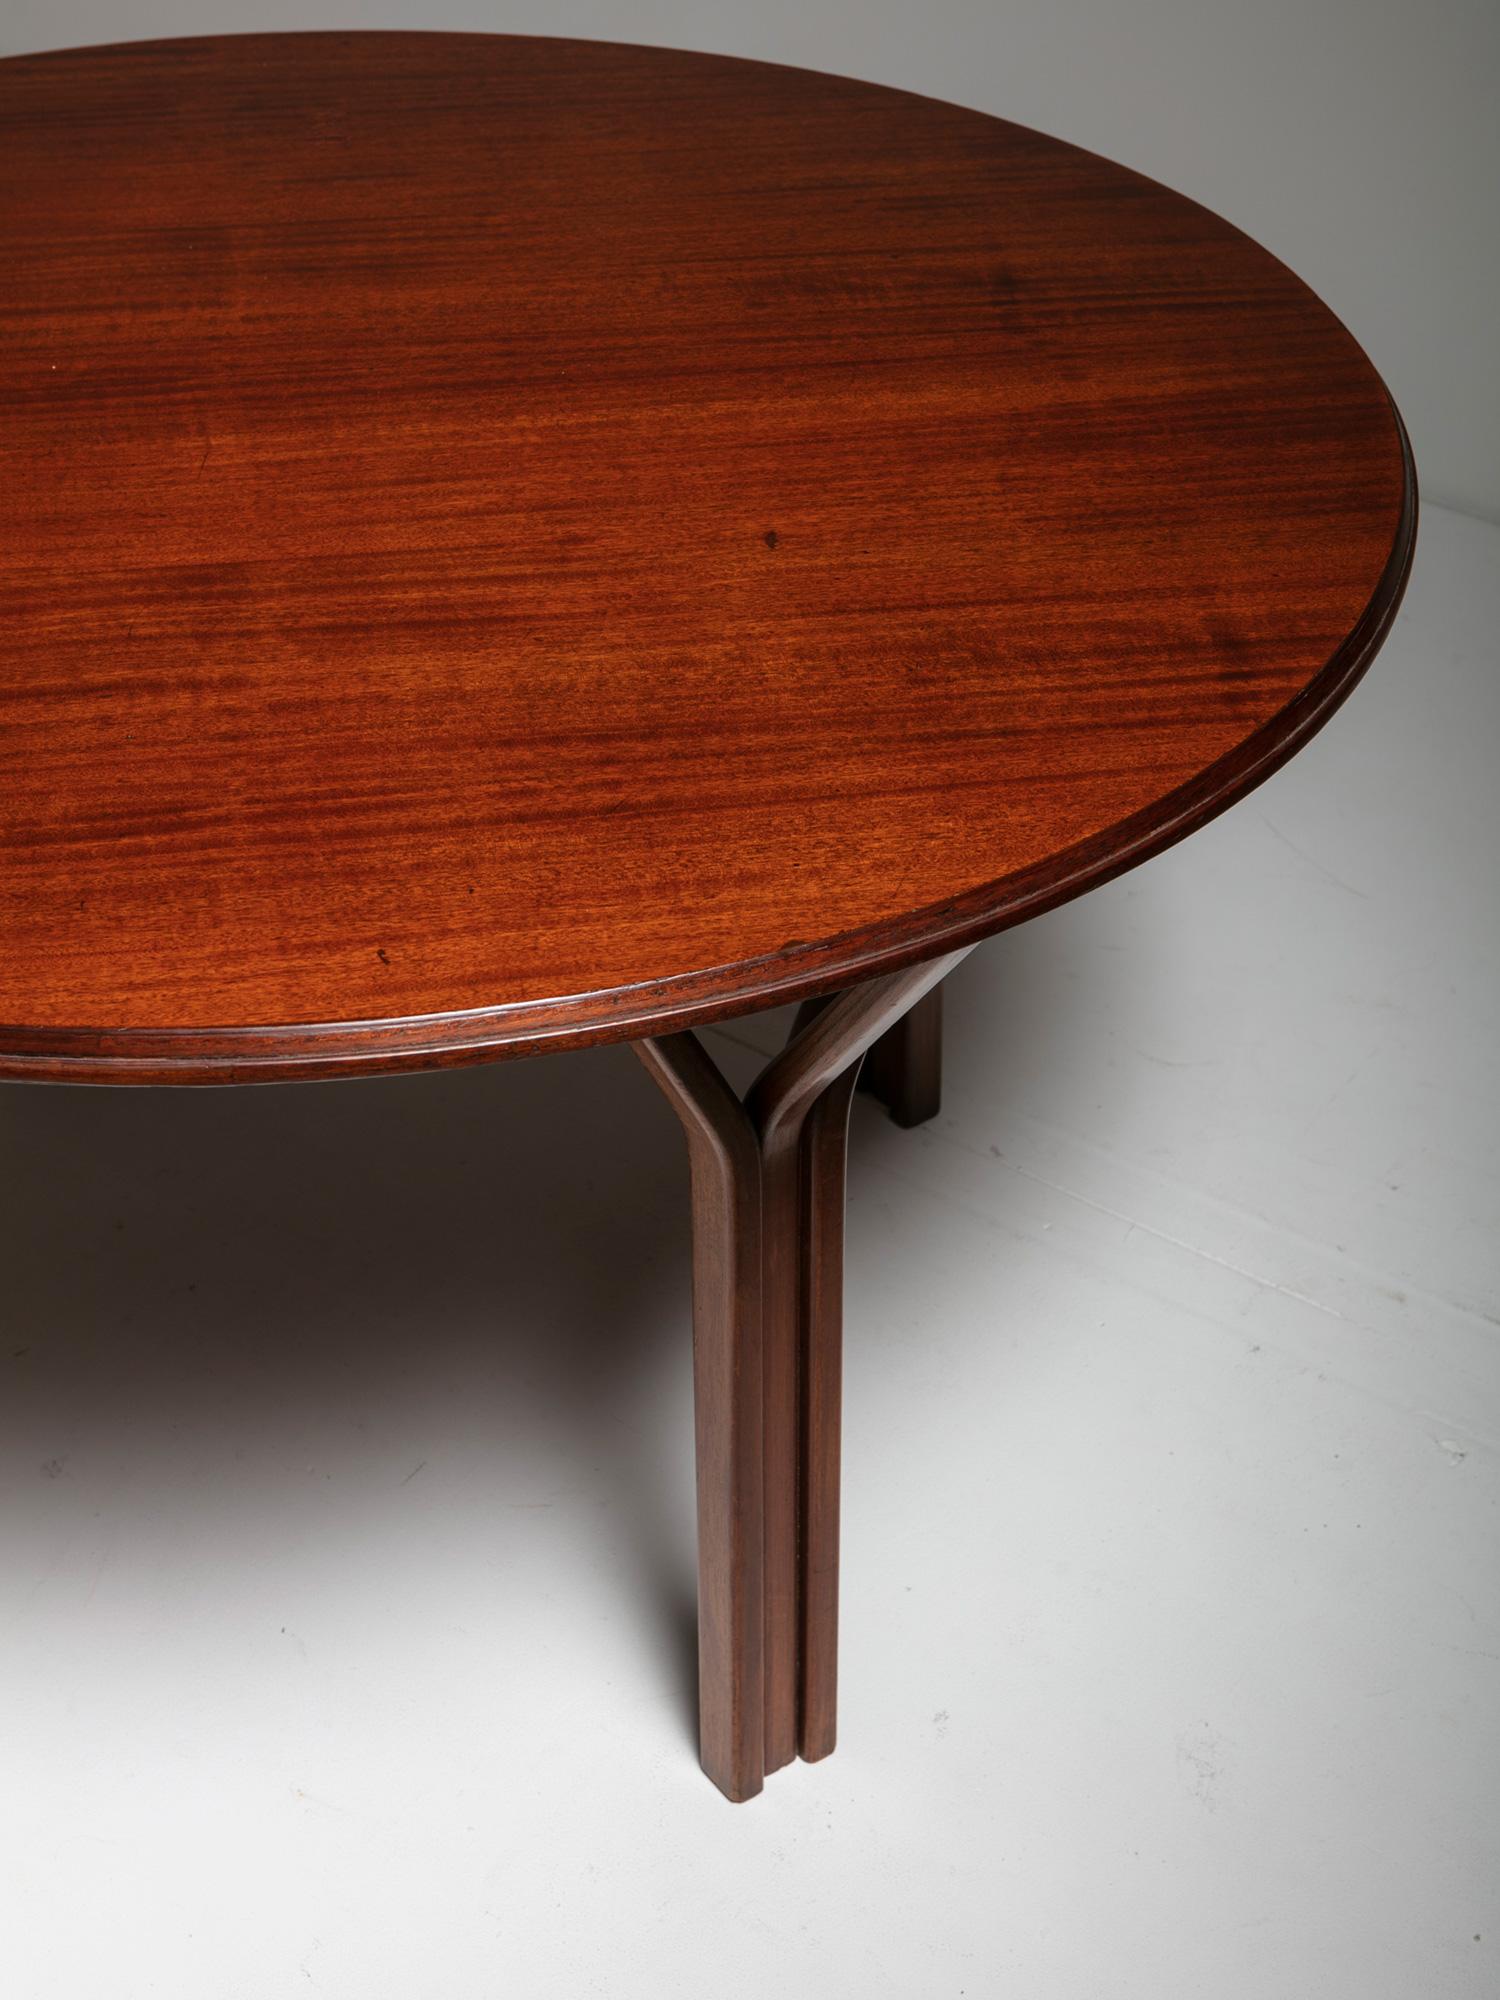 Round  Wood Table by Gregotti, Meneghetti, Stoppino for SIM, Italy, 1950s In Good Condition For Sale In Milan, IT